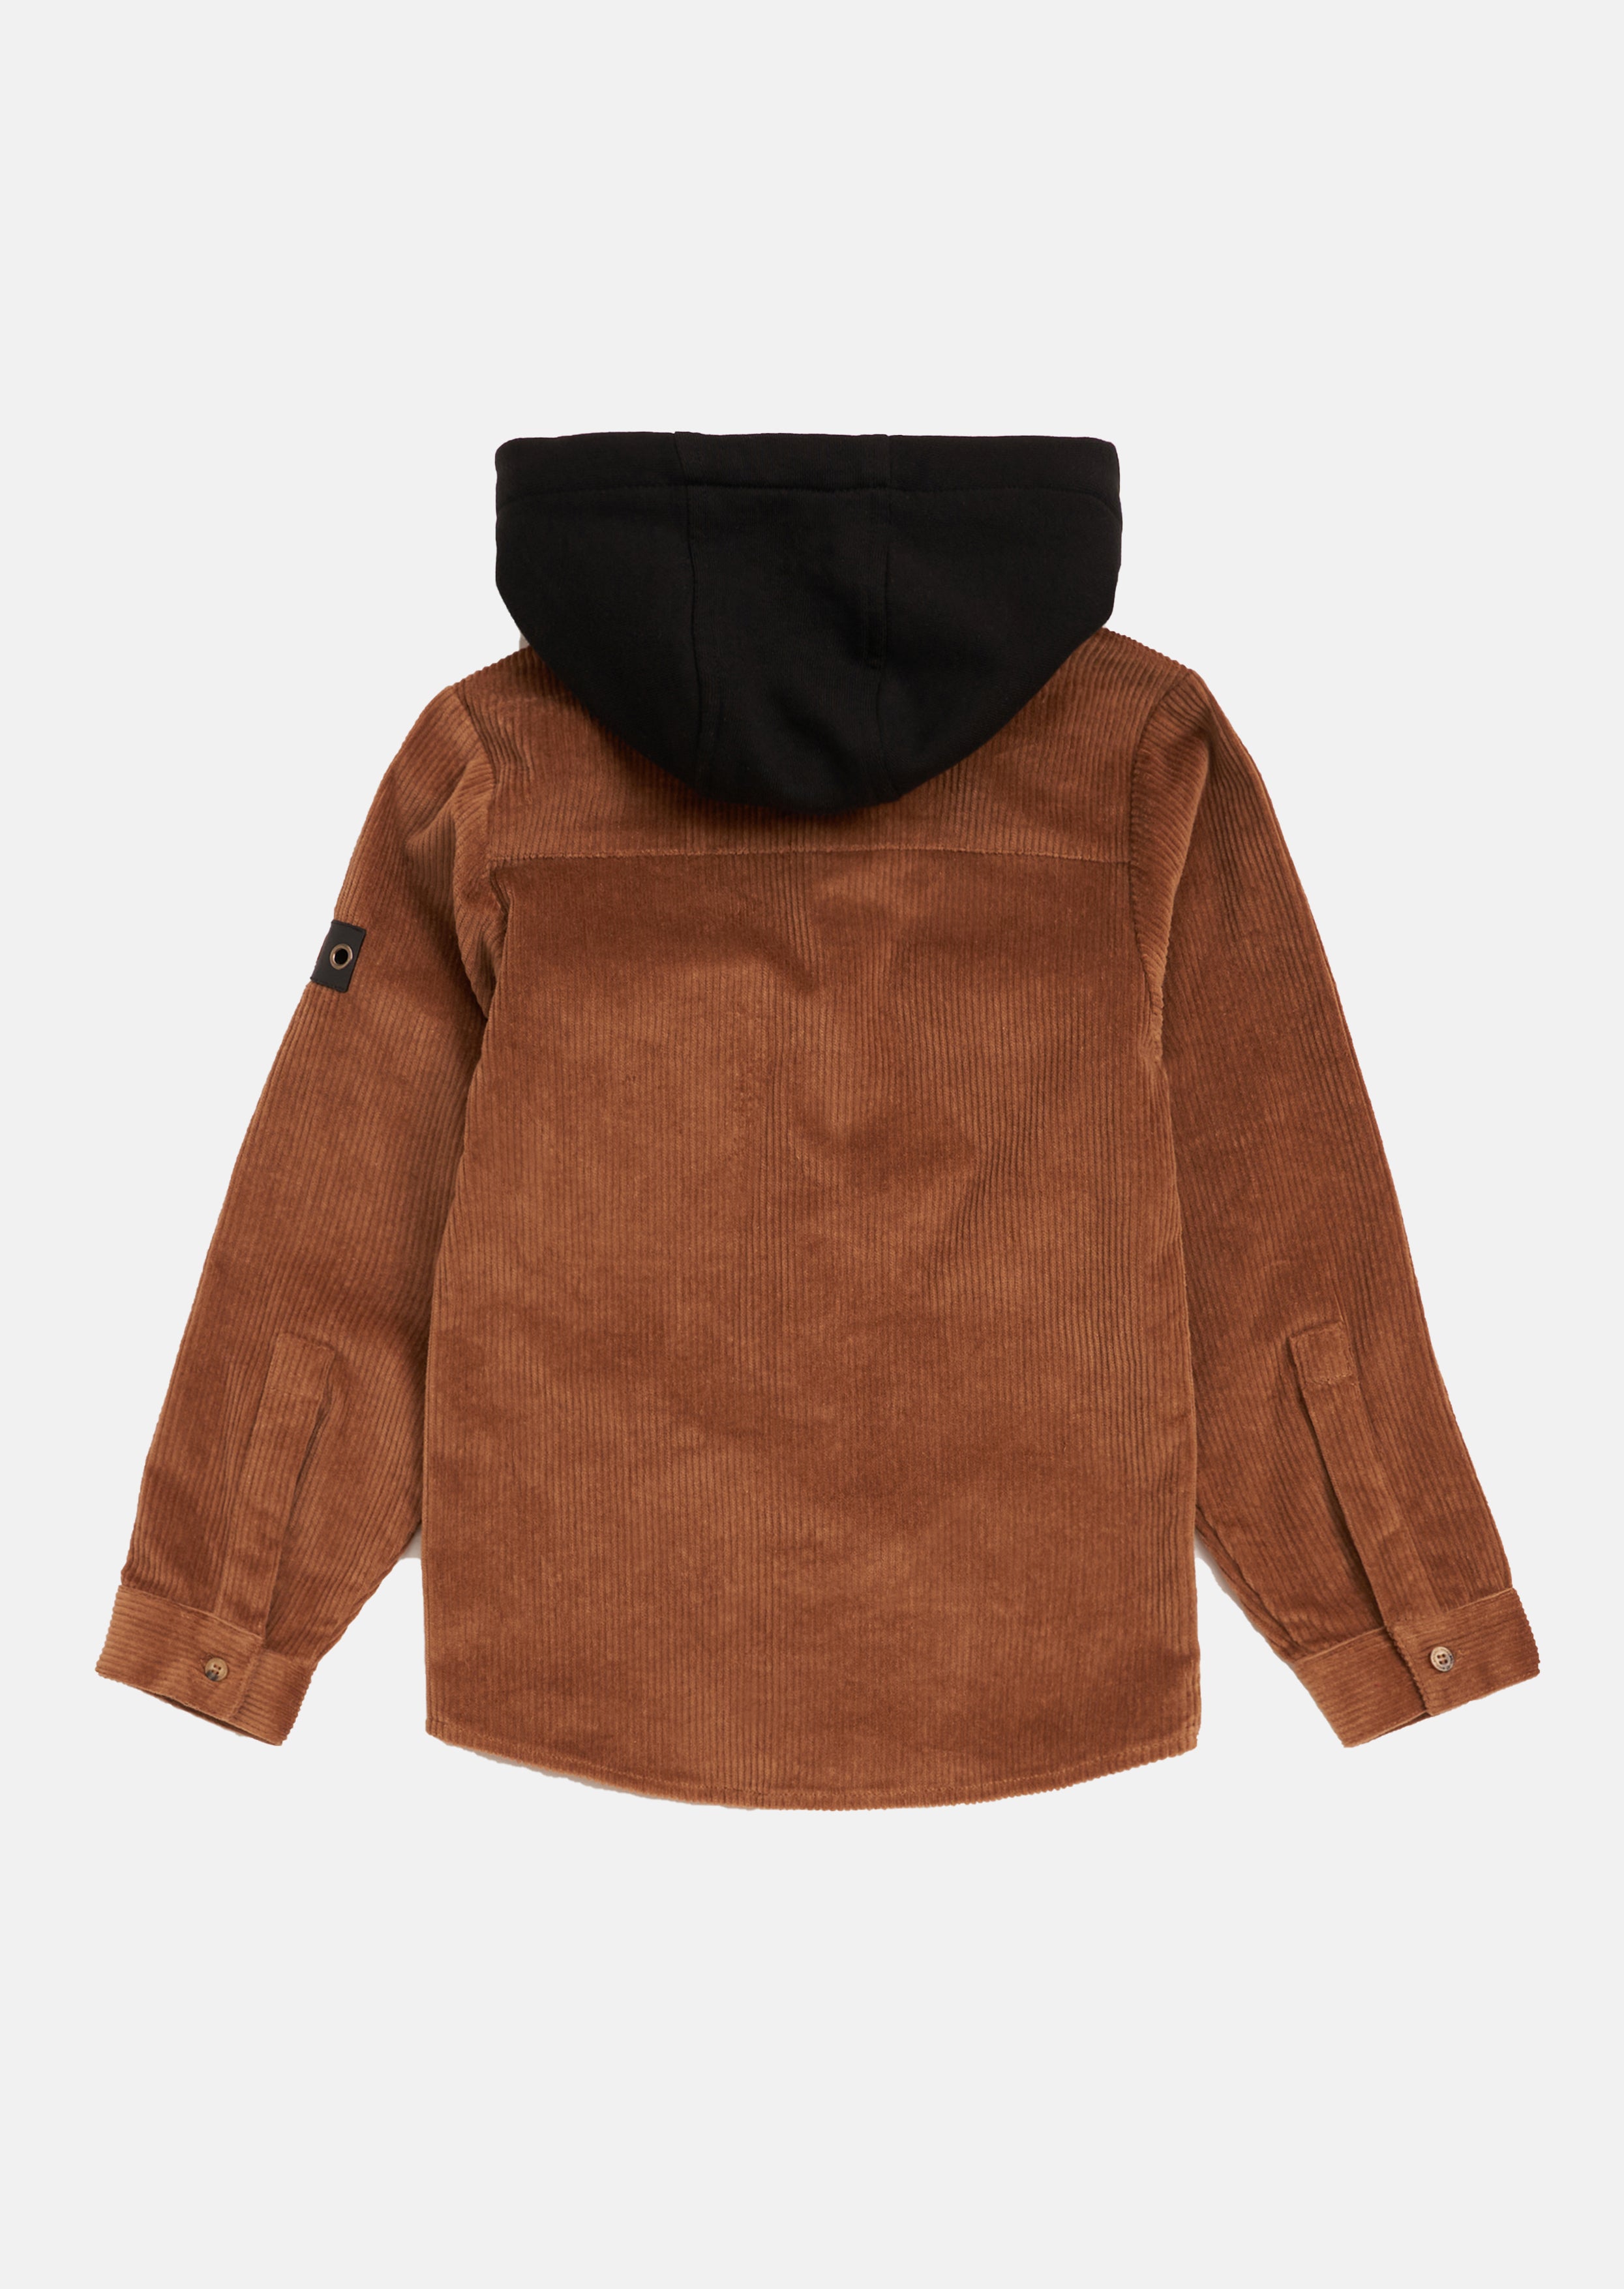 Boys Brown Full Sleeves Shirt with Hooded